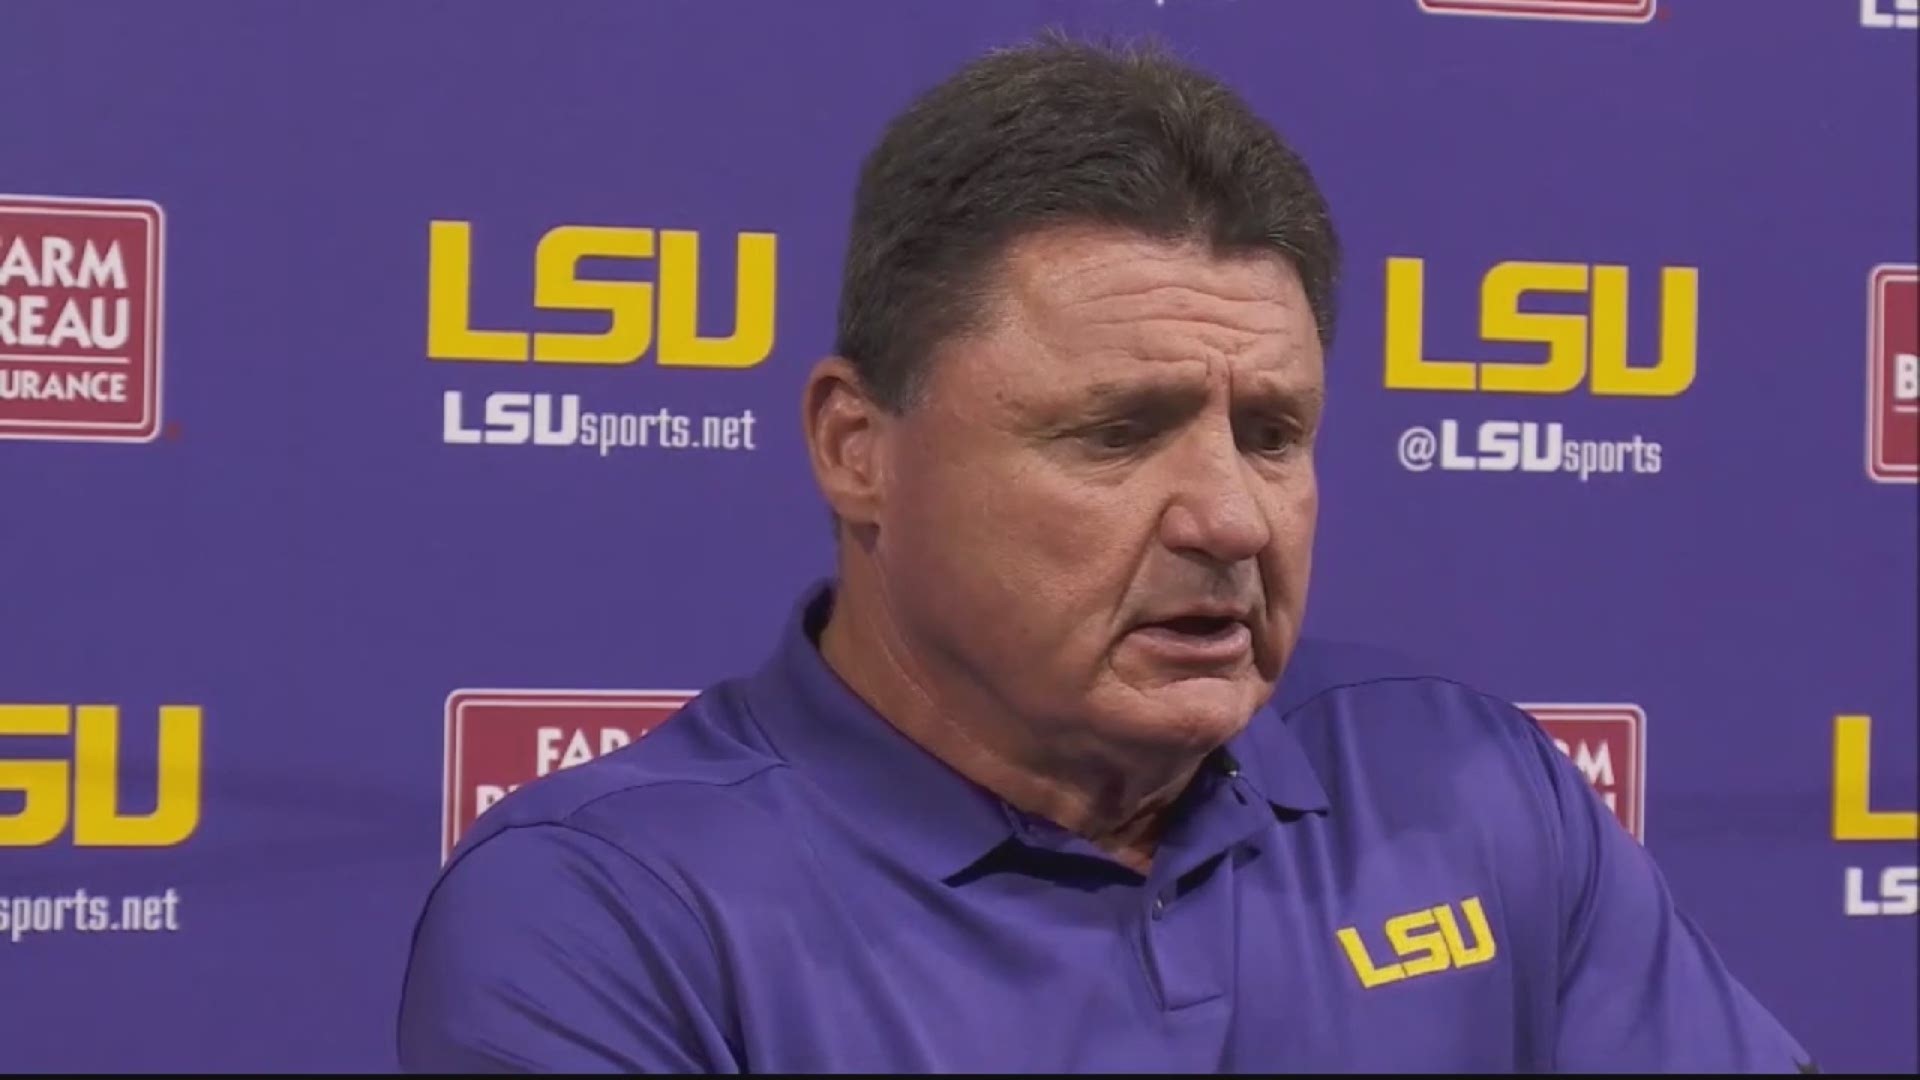 LSU Head Coach Ed Orgeron says LSU will do the same thing they've done all season to get ready for the biggest game of their season against Clemson.